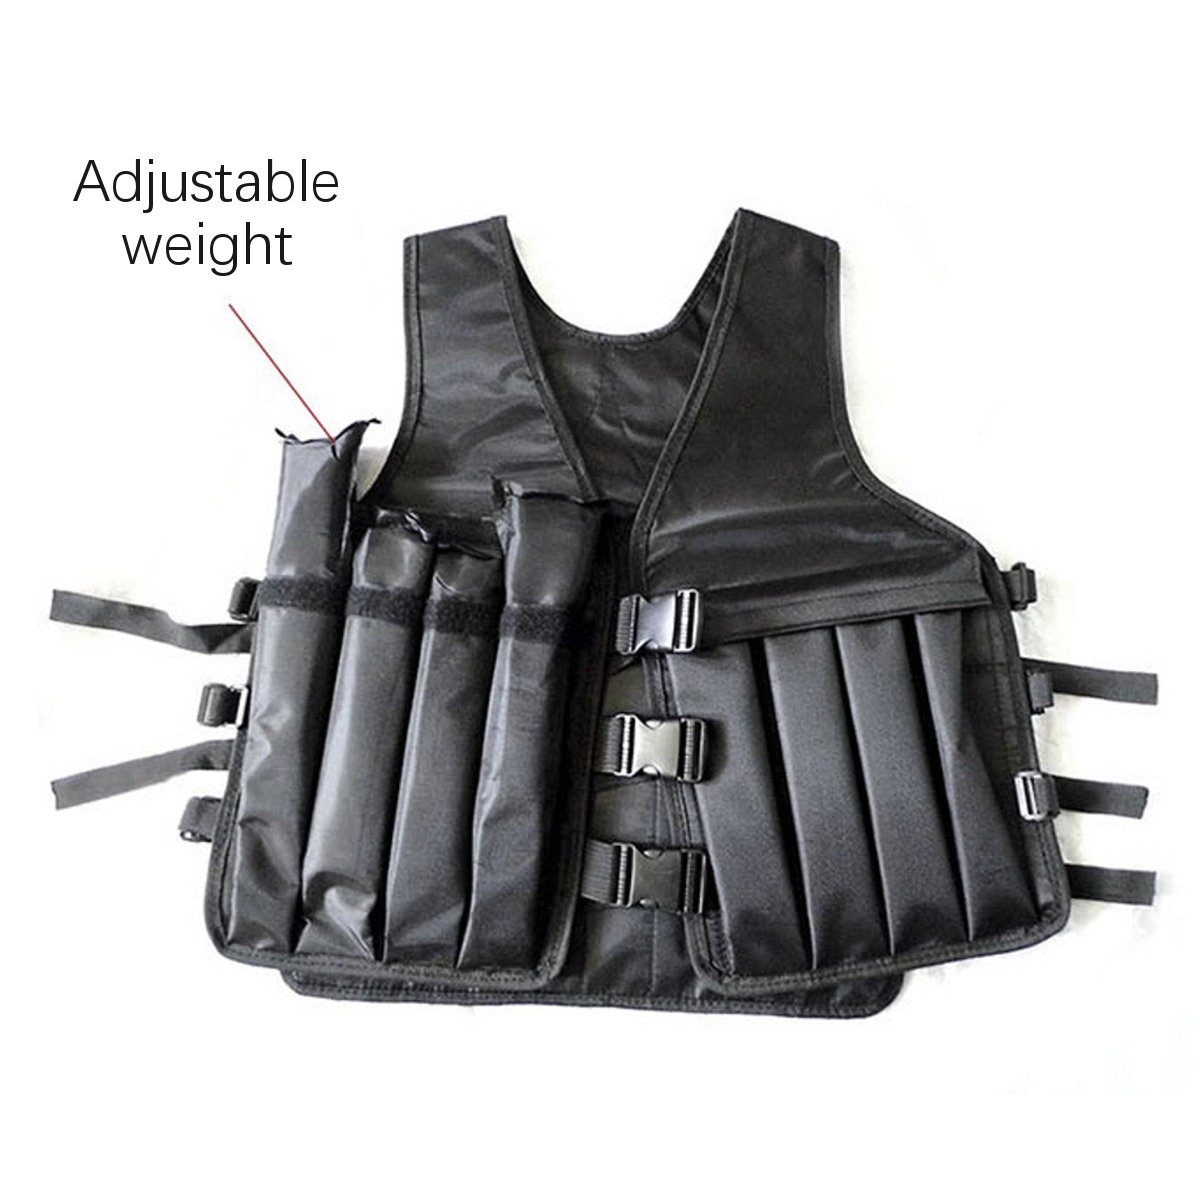 Adjustable-Weight-Vest-Running-Sports-Shaping-Slimming-Fitness-Weight-Bearing-Equipment-1695473-1